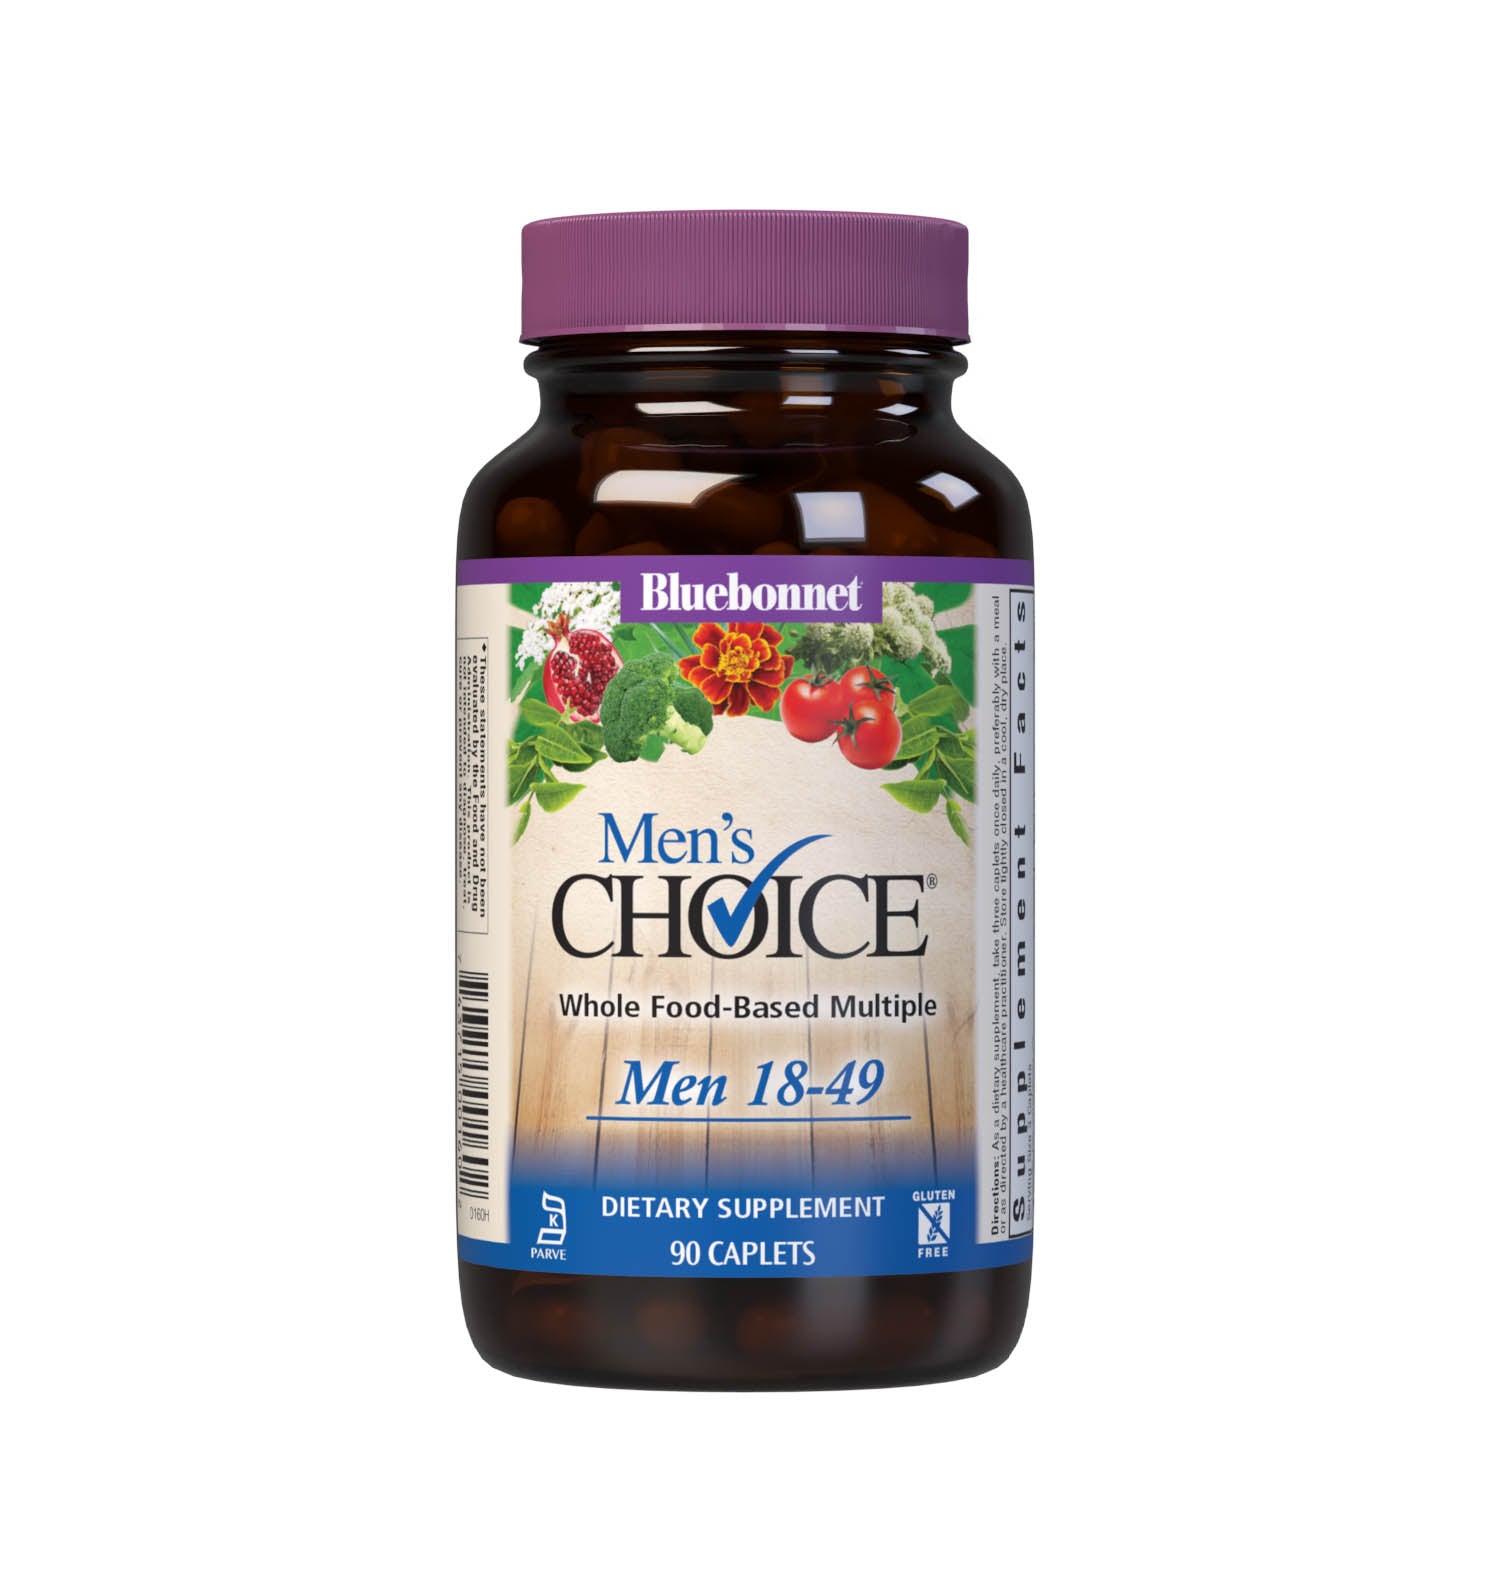 Bluebonnet’s Men’s Choice 90 Caplets are a three-a-day whole food-based multivitamin and multimineral dietary supplement designed for men 18 to 49 and are available in easy-to-swallow caplets for maximum assimilation and absorption. #size_90 count